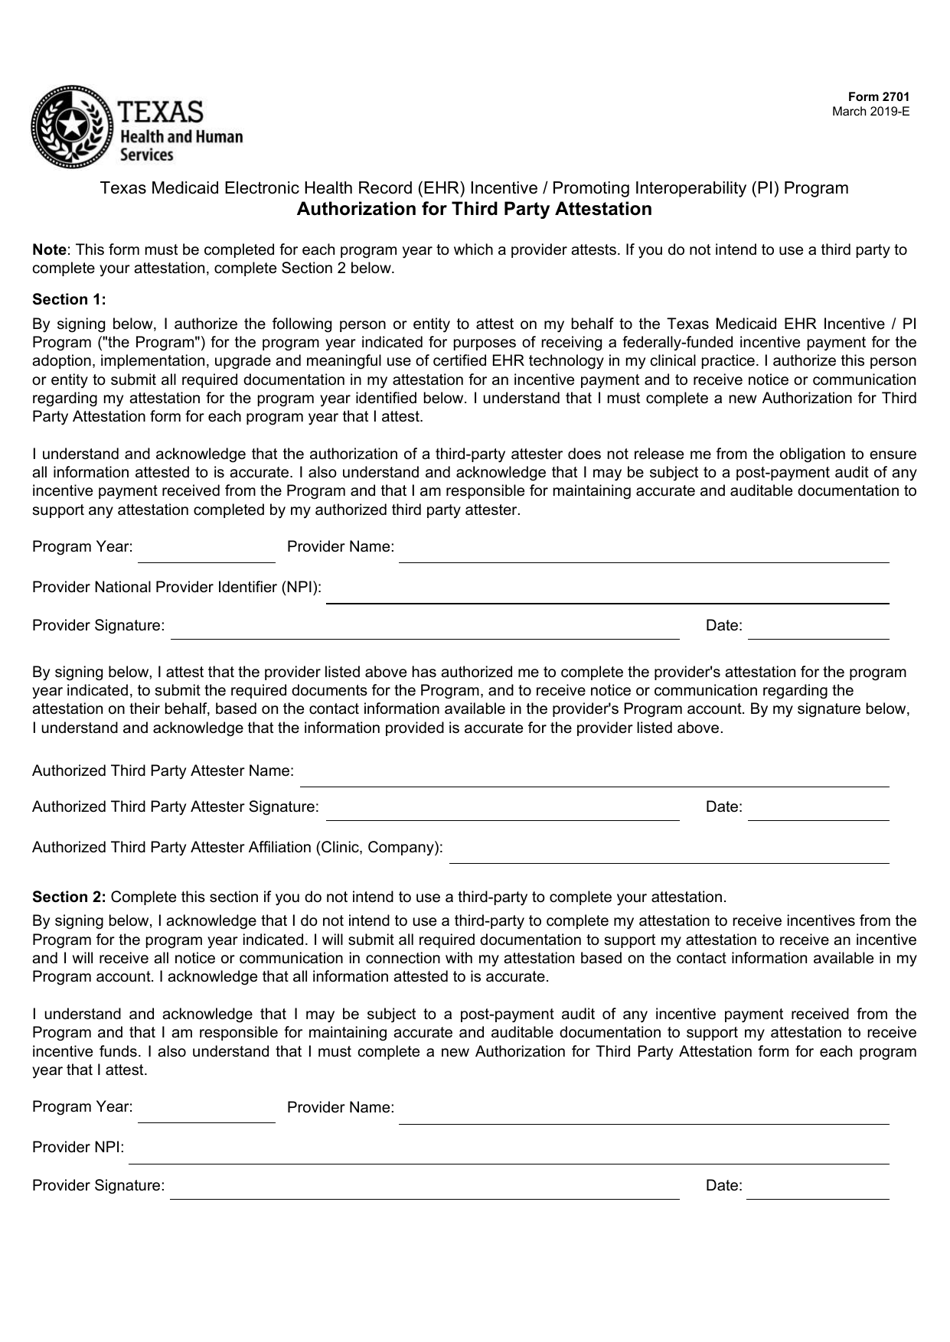 Form 2701 Authorization for Third Party Attestation - Texas, Page 1